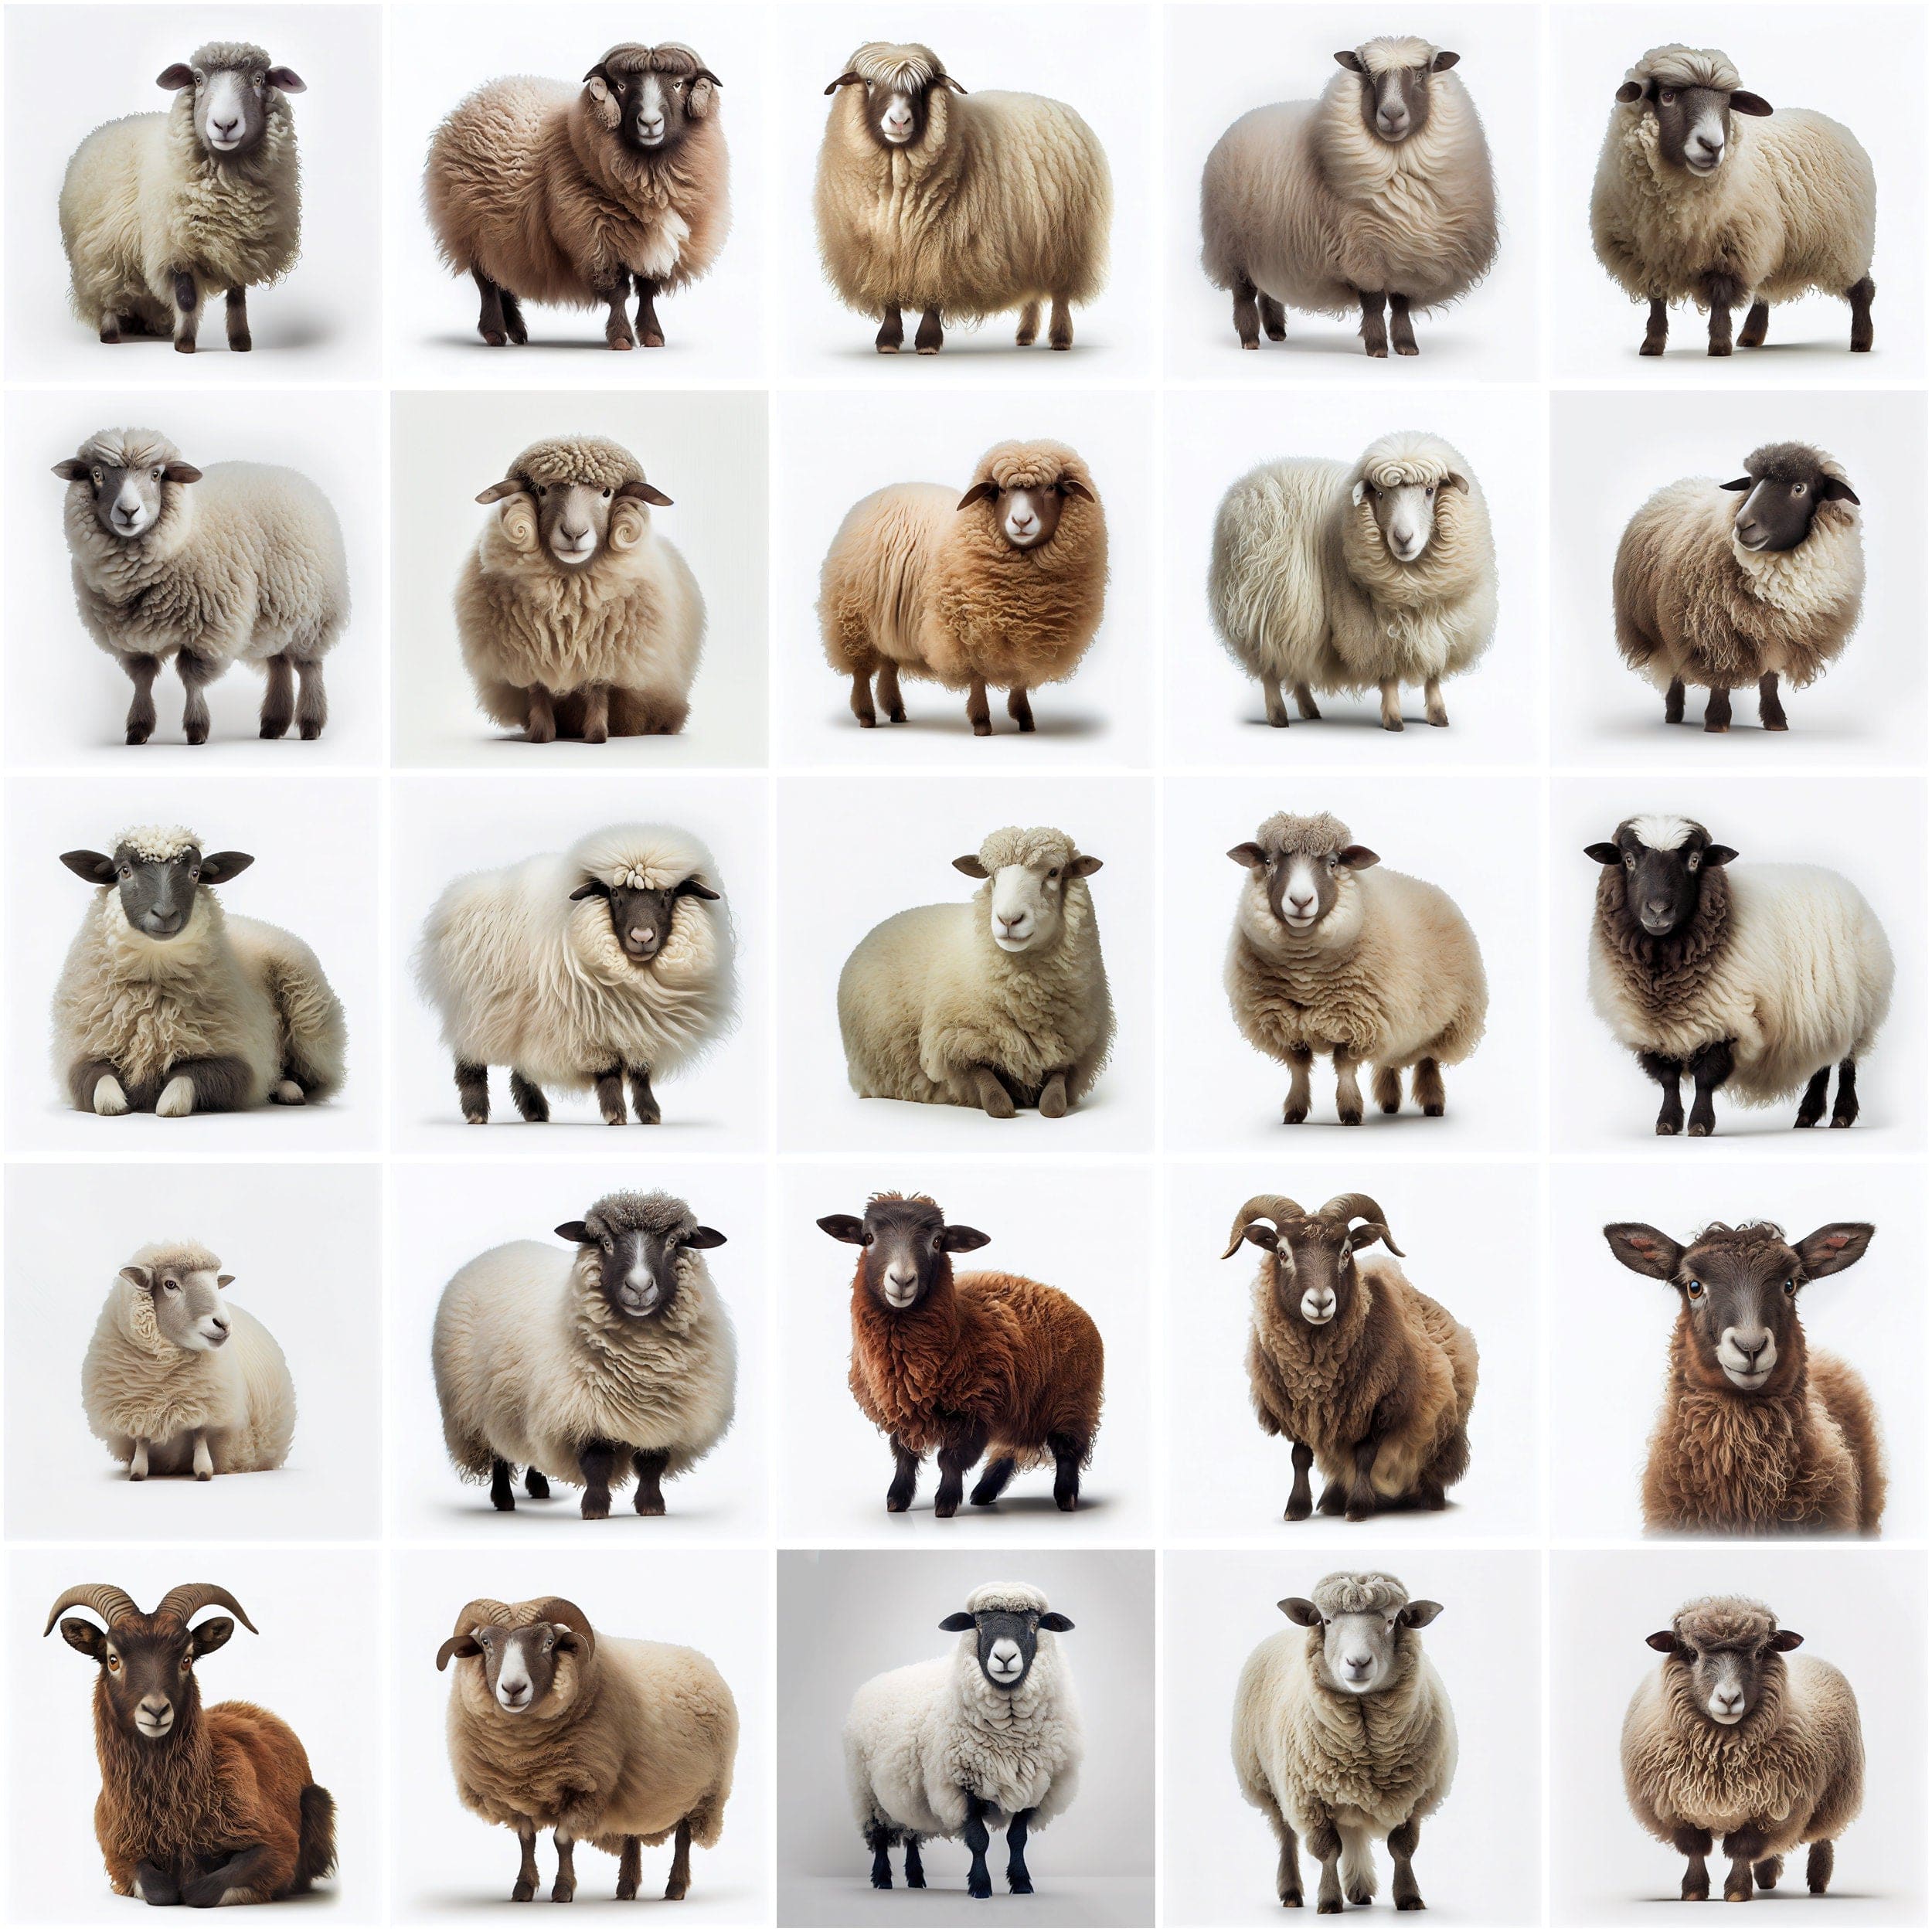 180 Cute Images with Sheep Breeds, Sheep breeds clipart. Sheep Breeds of the World: A Stunning Collection of Images for Farmers Digital Download Sumobundle